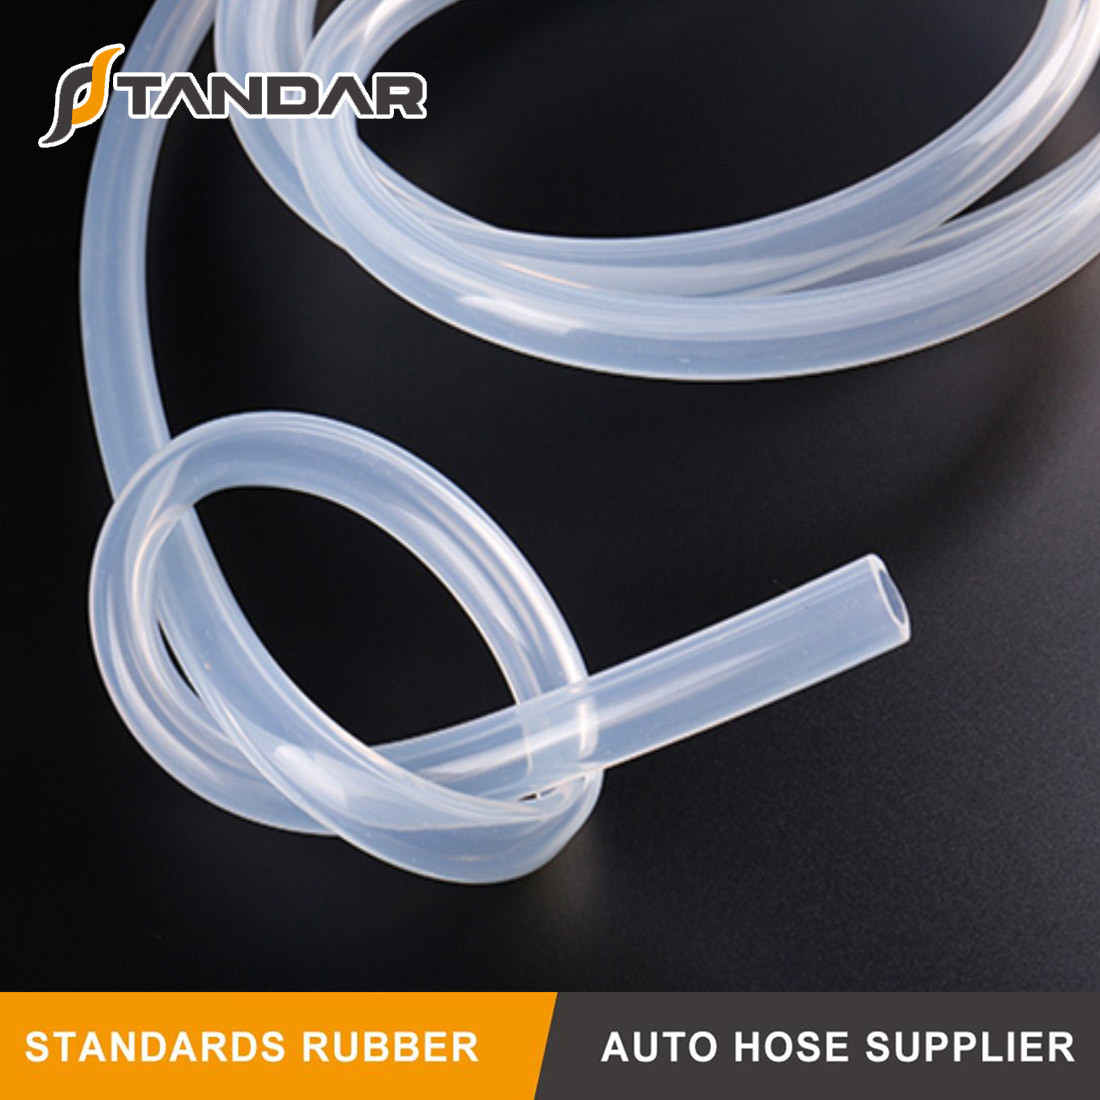 Why are food grade silicone hoses prone to bubbles?